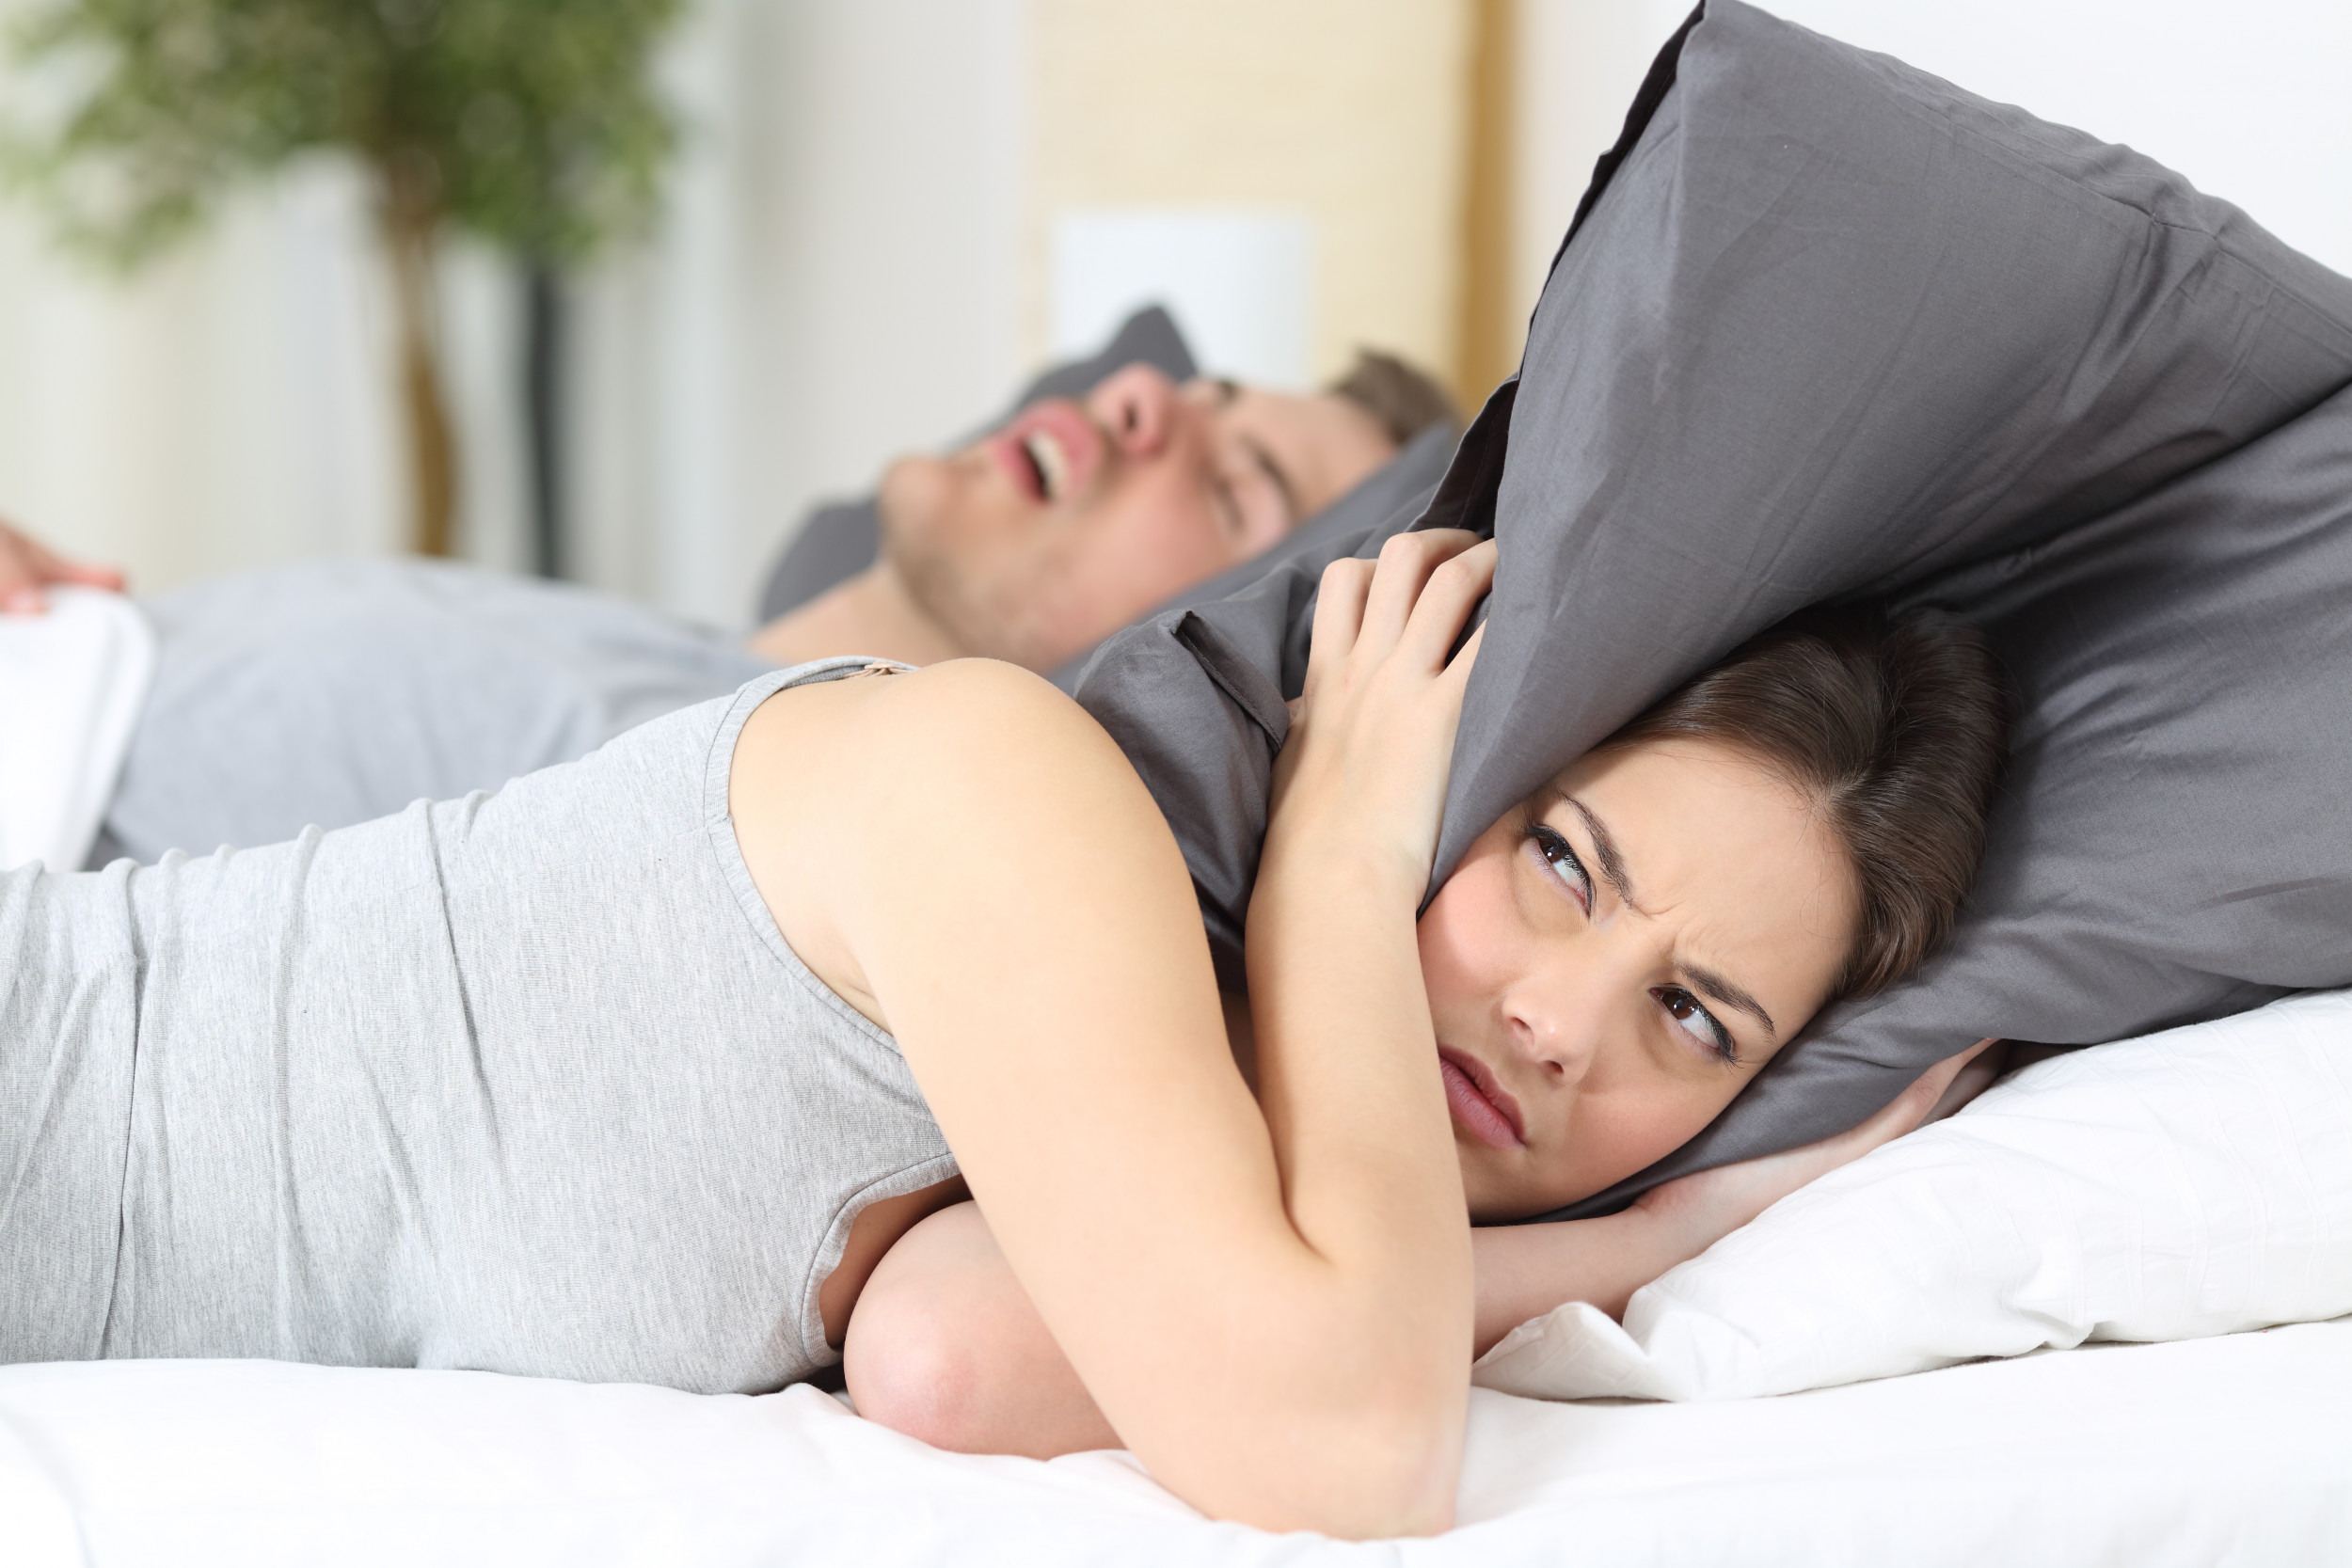 Wife Who Wants to Sleep in Separate Bed From Husband Praised Be Selfish image